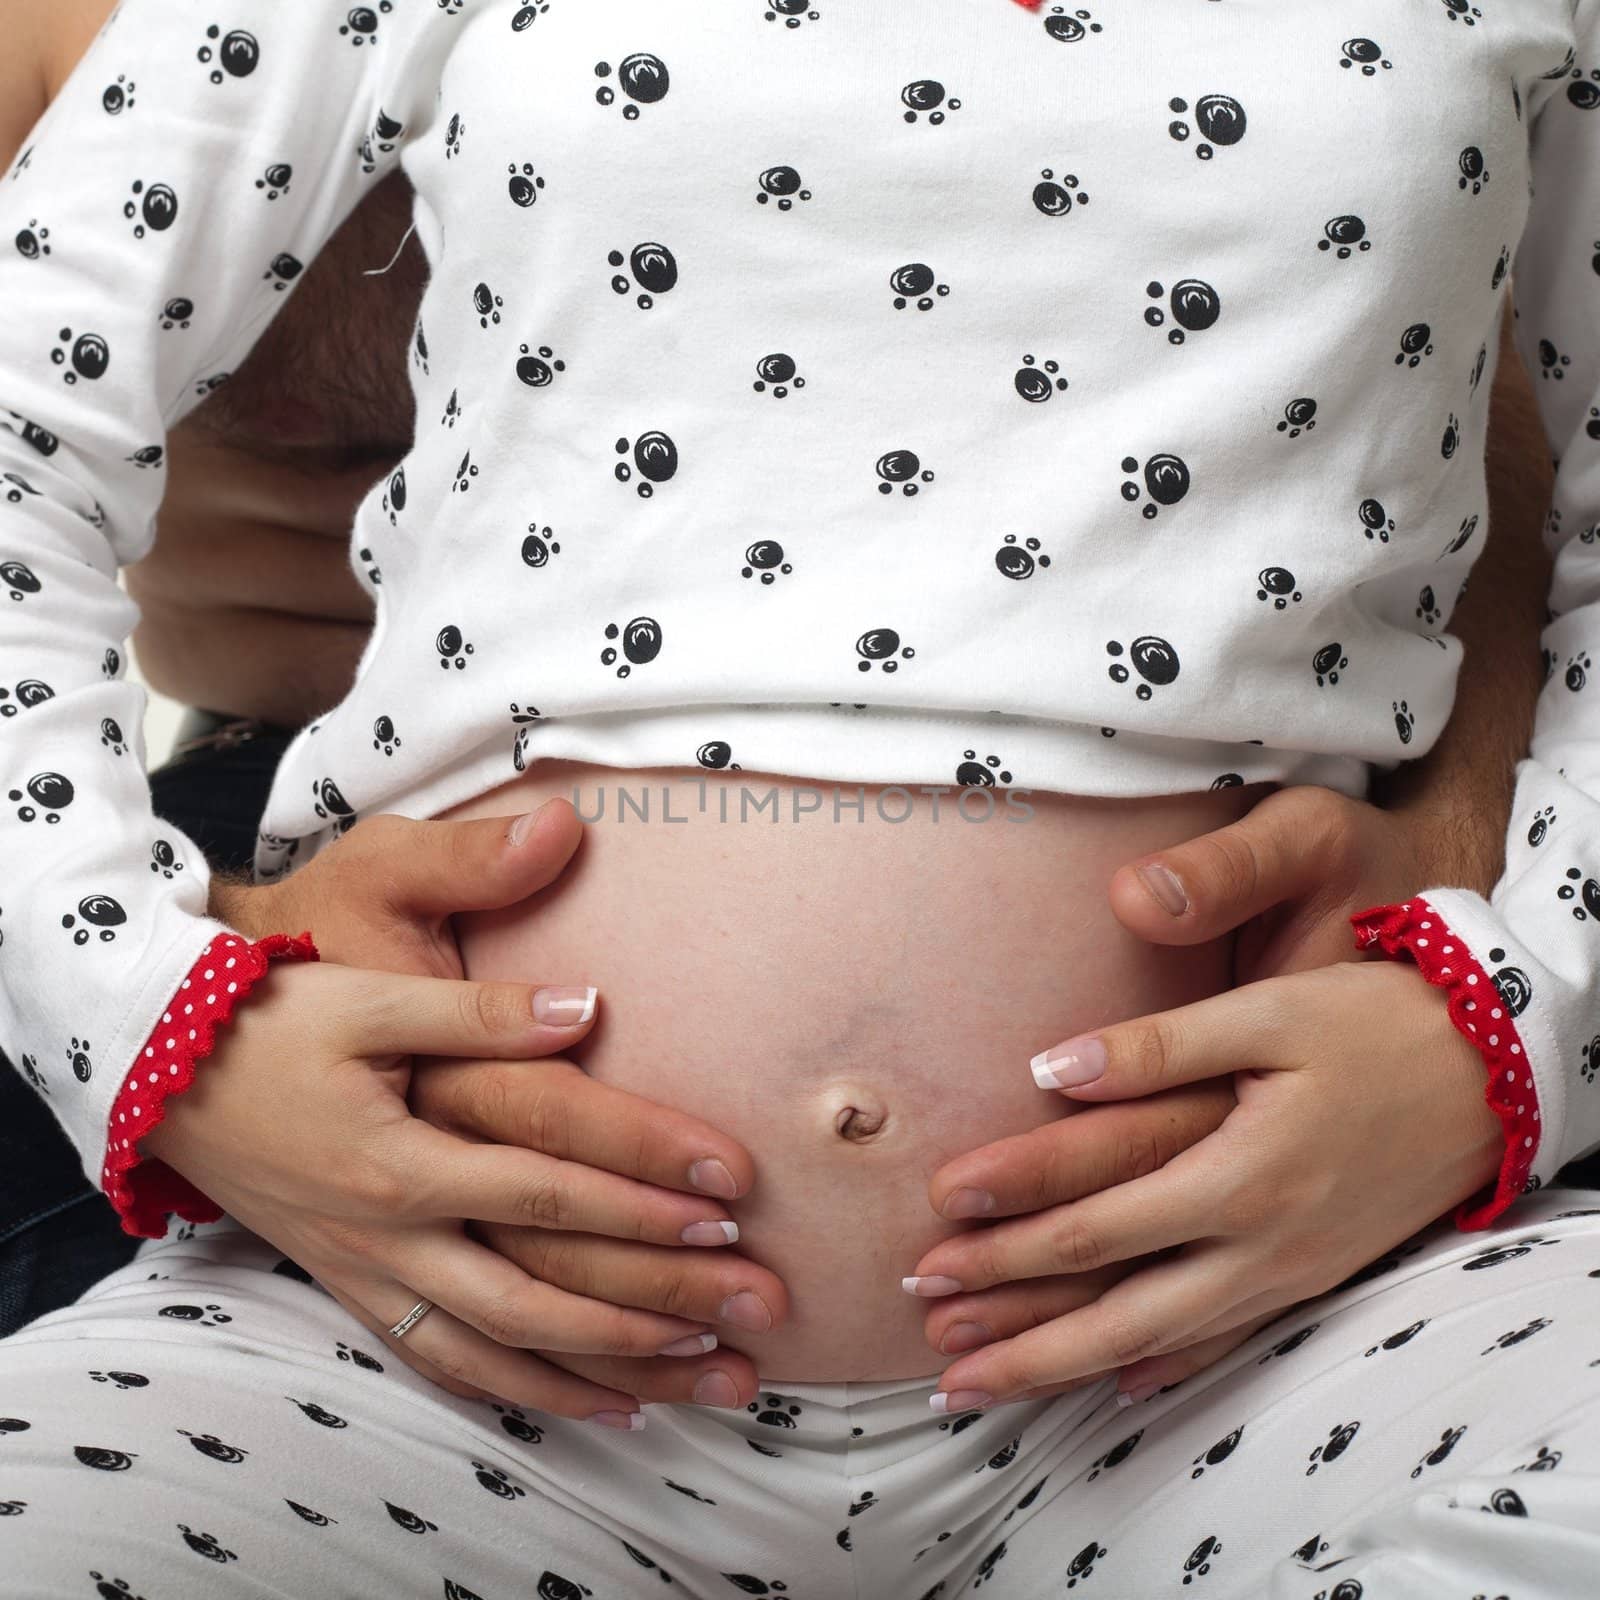 An image of pregnant woman abdomen with hands on it